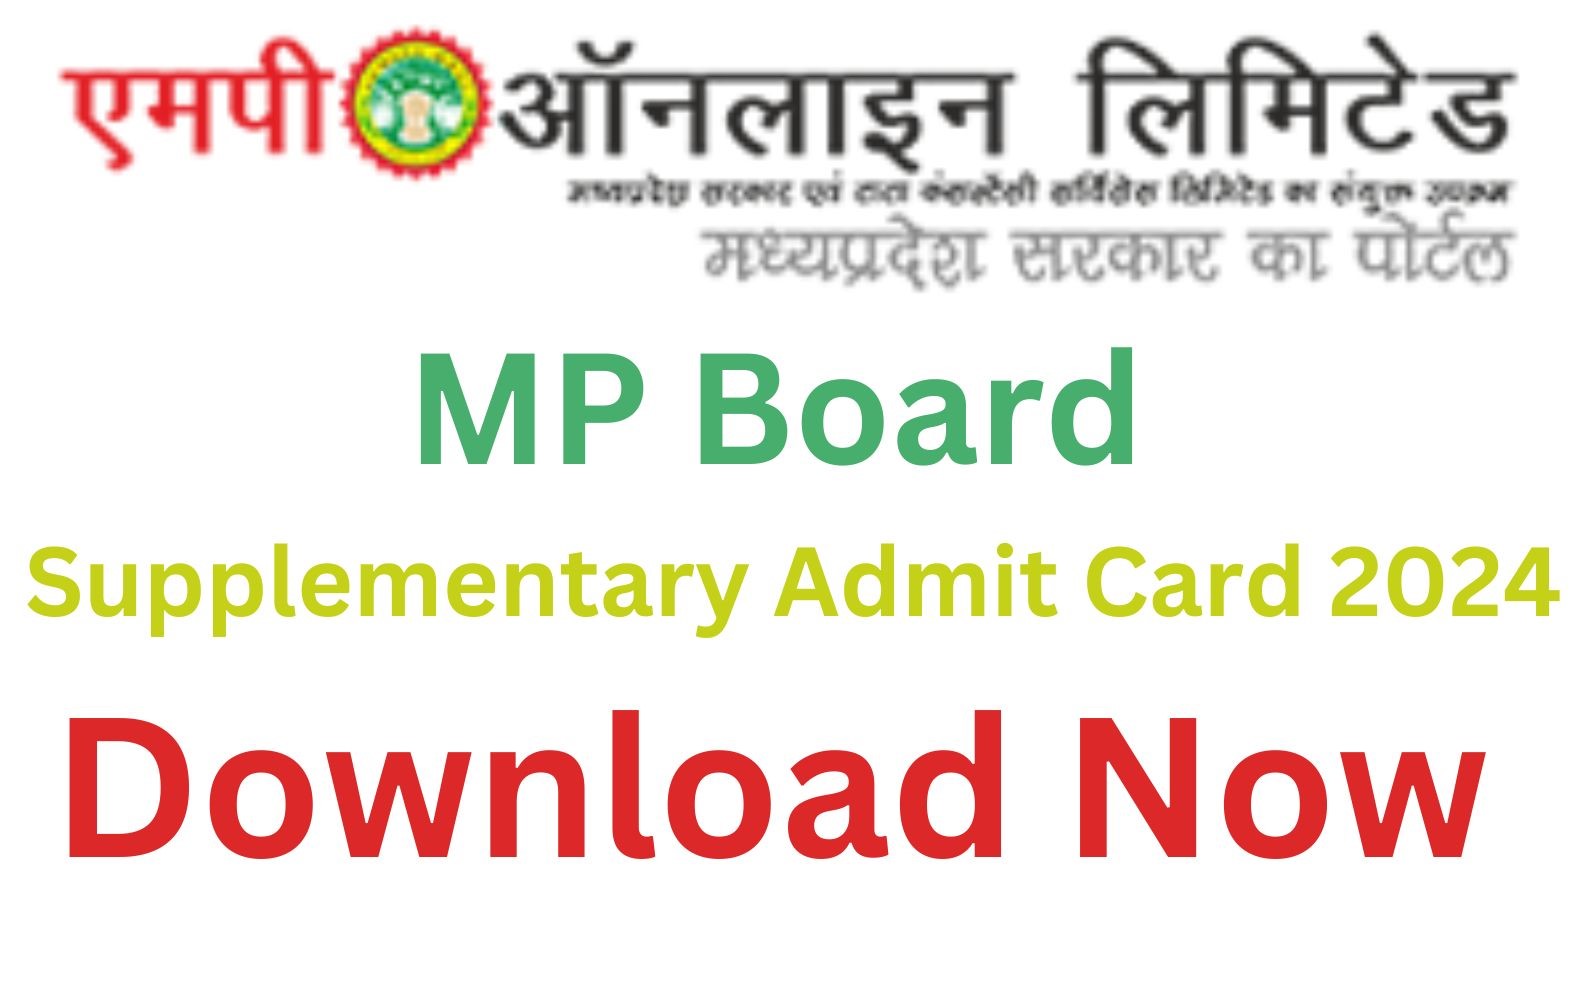 Download Your MP Board Supplementary Admit Card 2024 Now @mpbse.mponline.gov.in